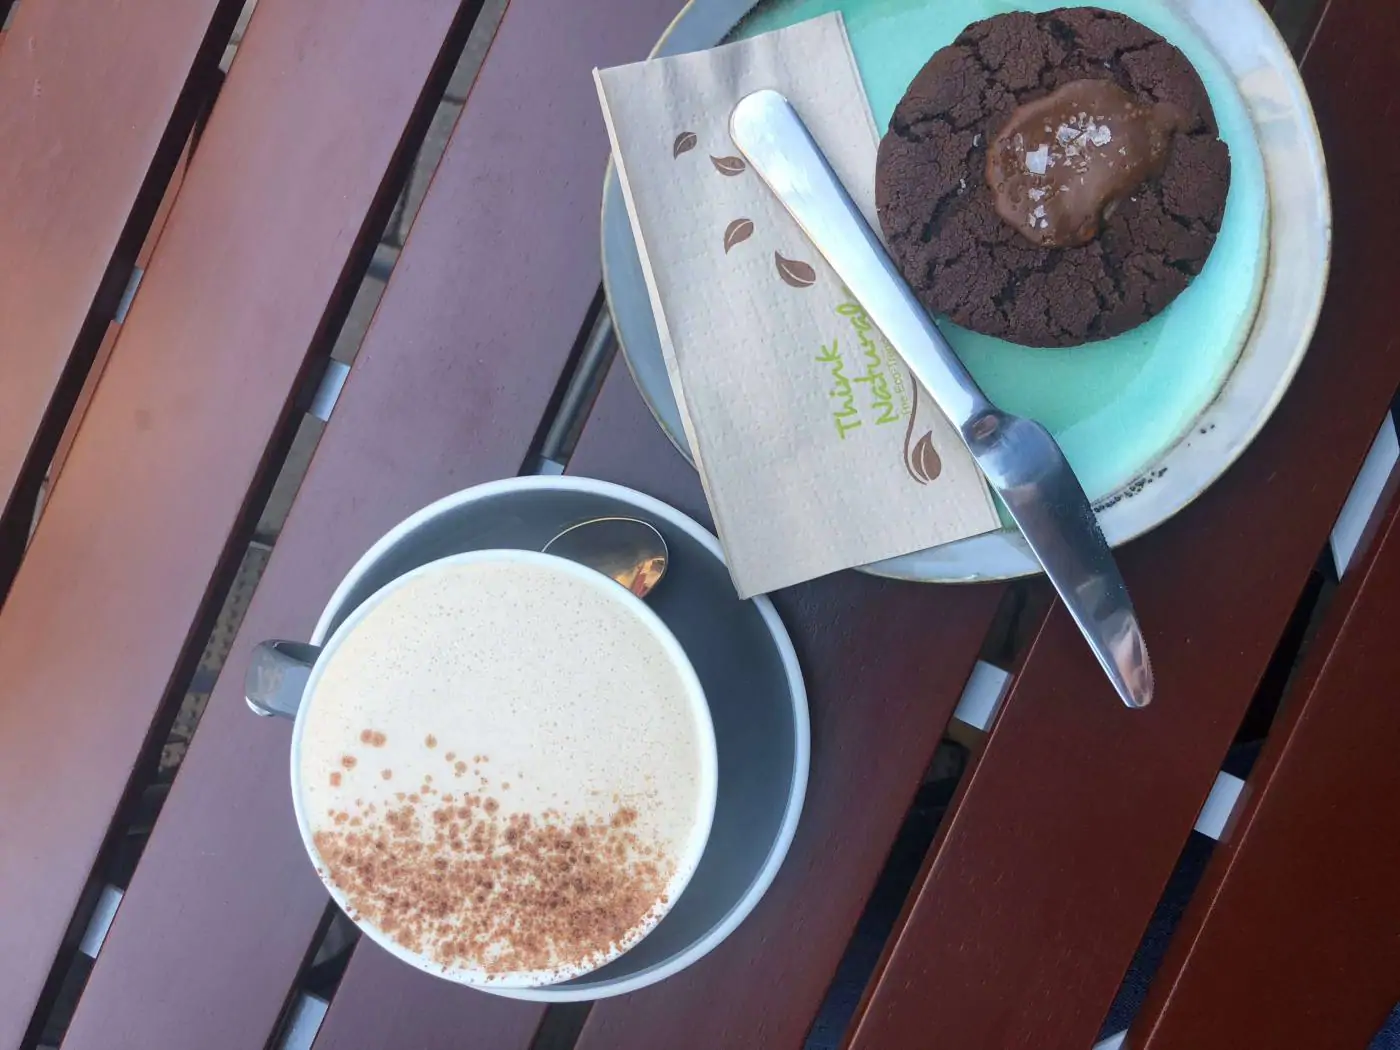 Chai and Chocolate cookie from The Little Lane Coffee Company in Galway Ireland